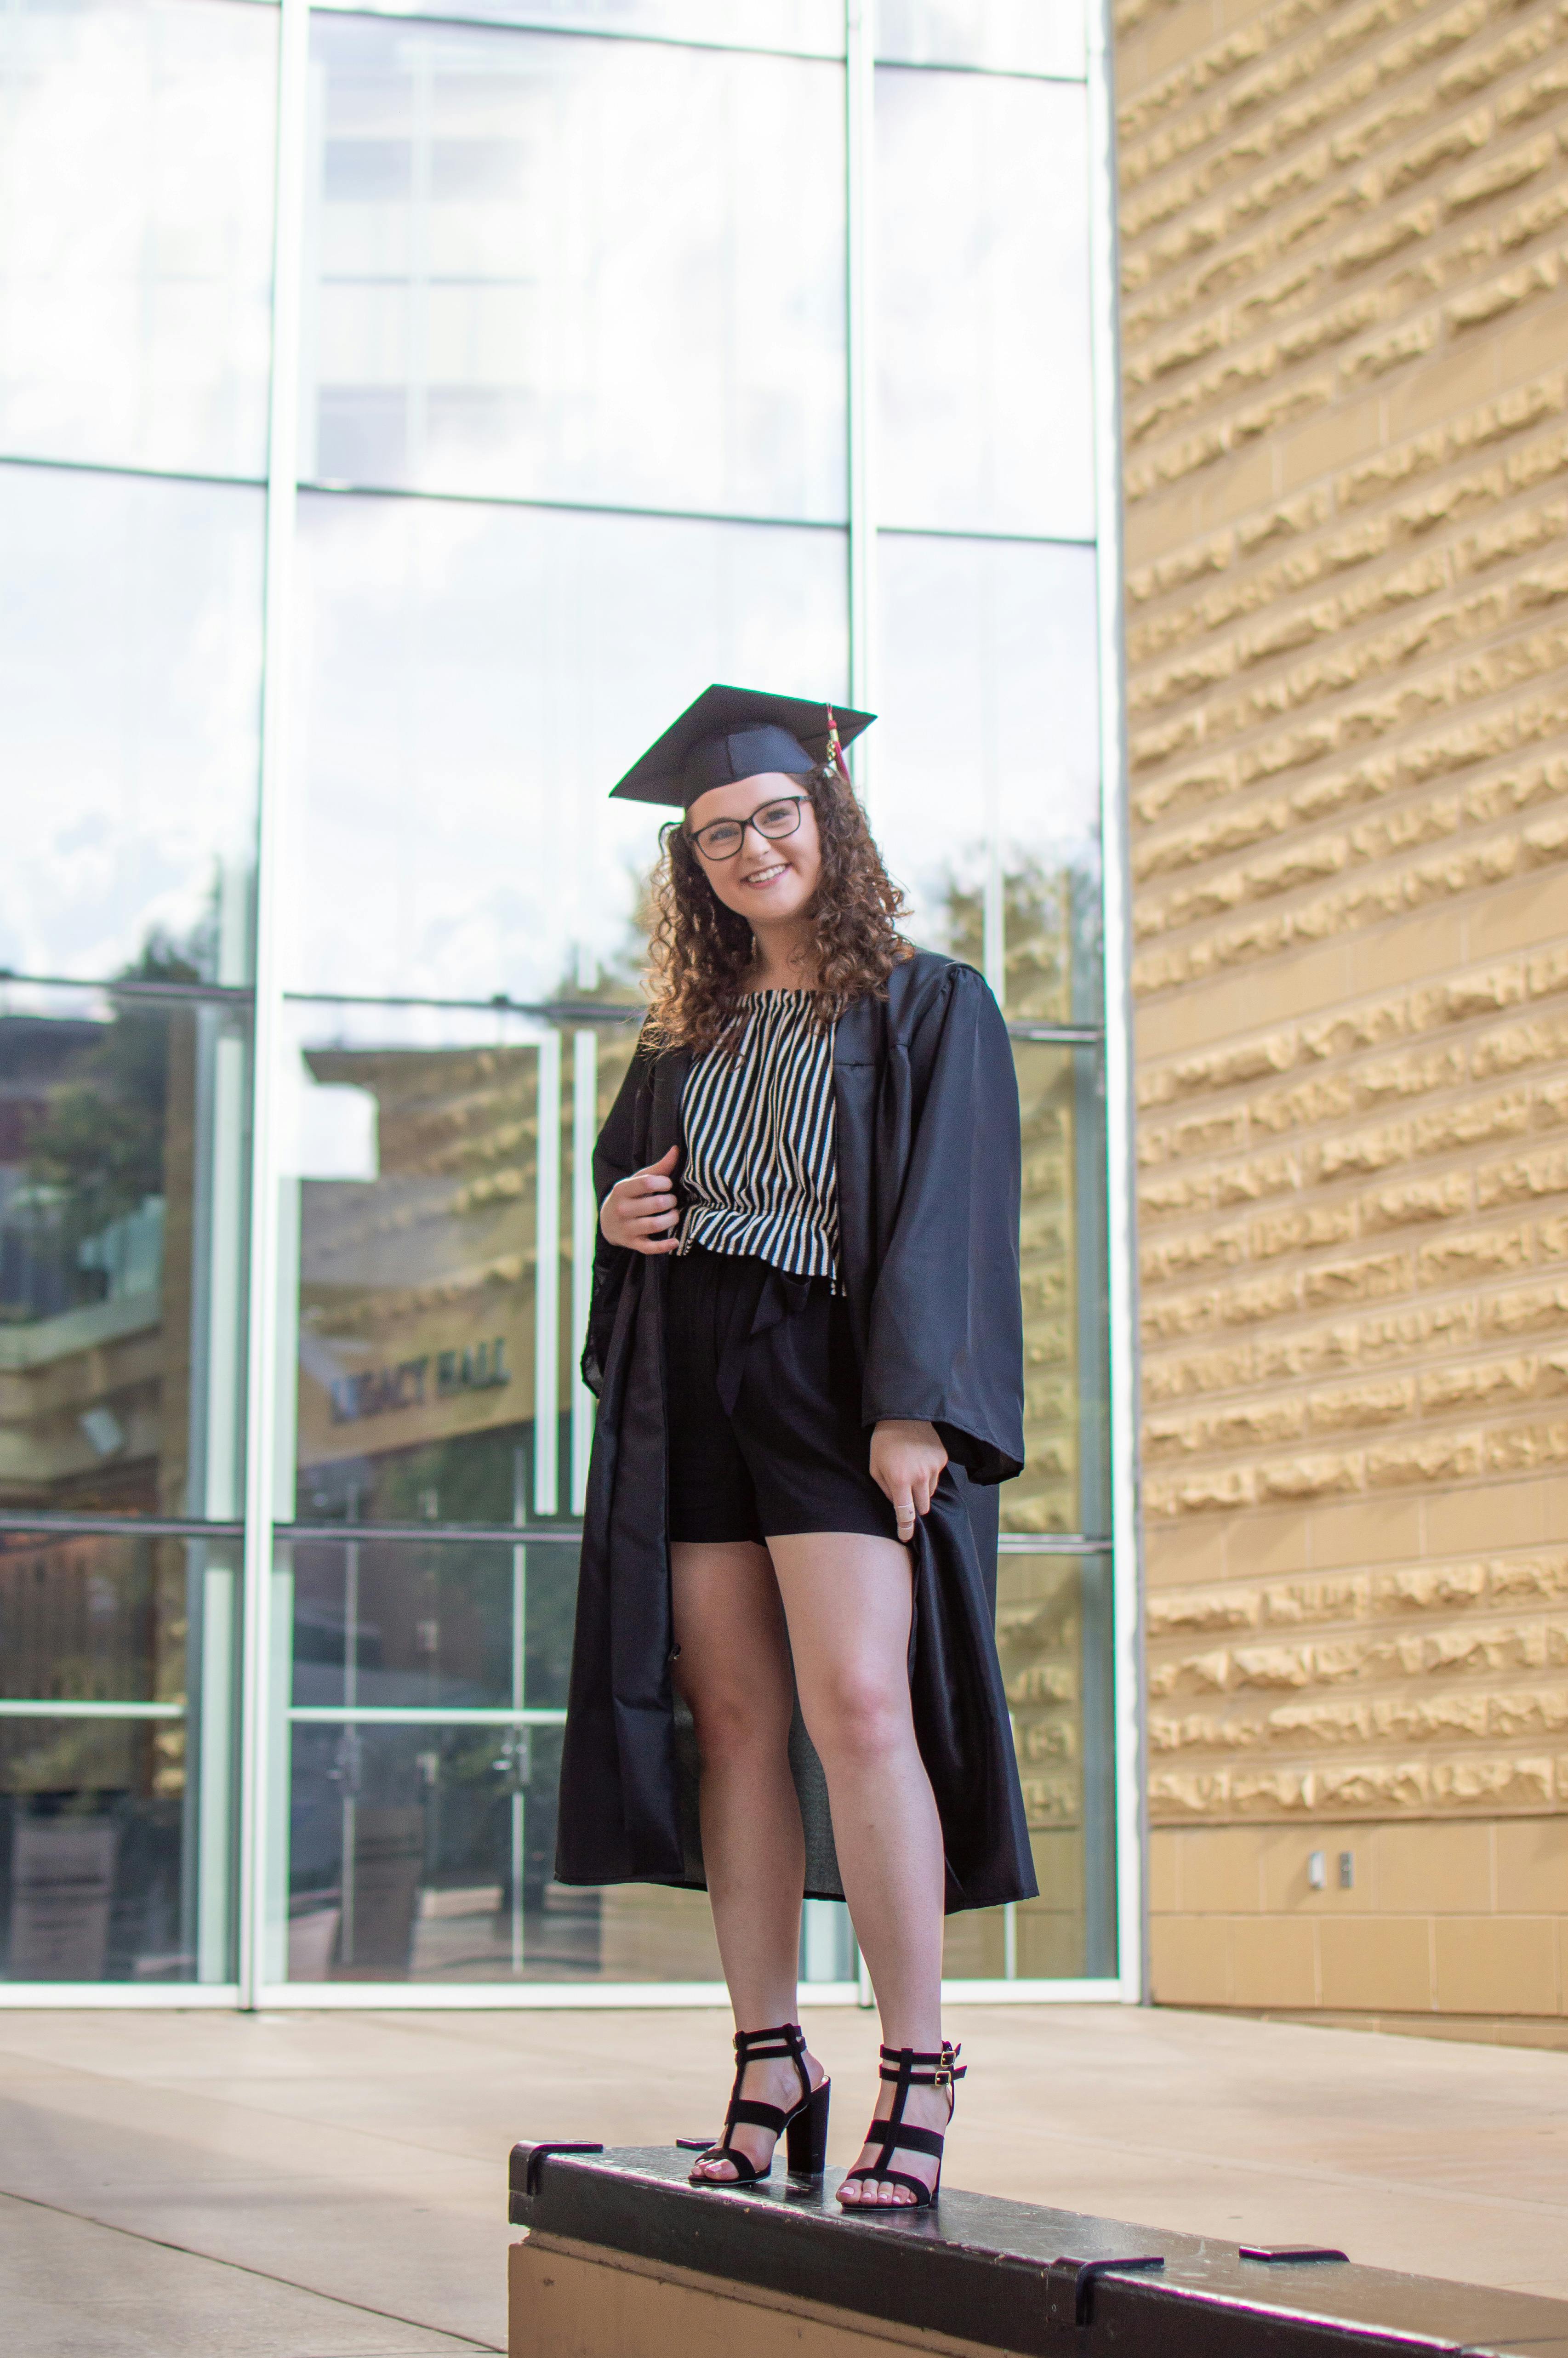 A proud college graduate posing for a picture | Source: Pexels